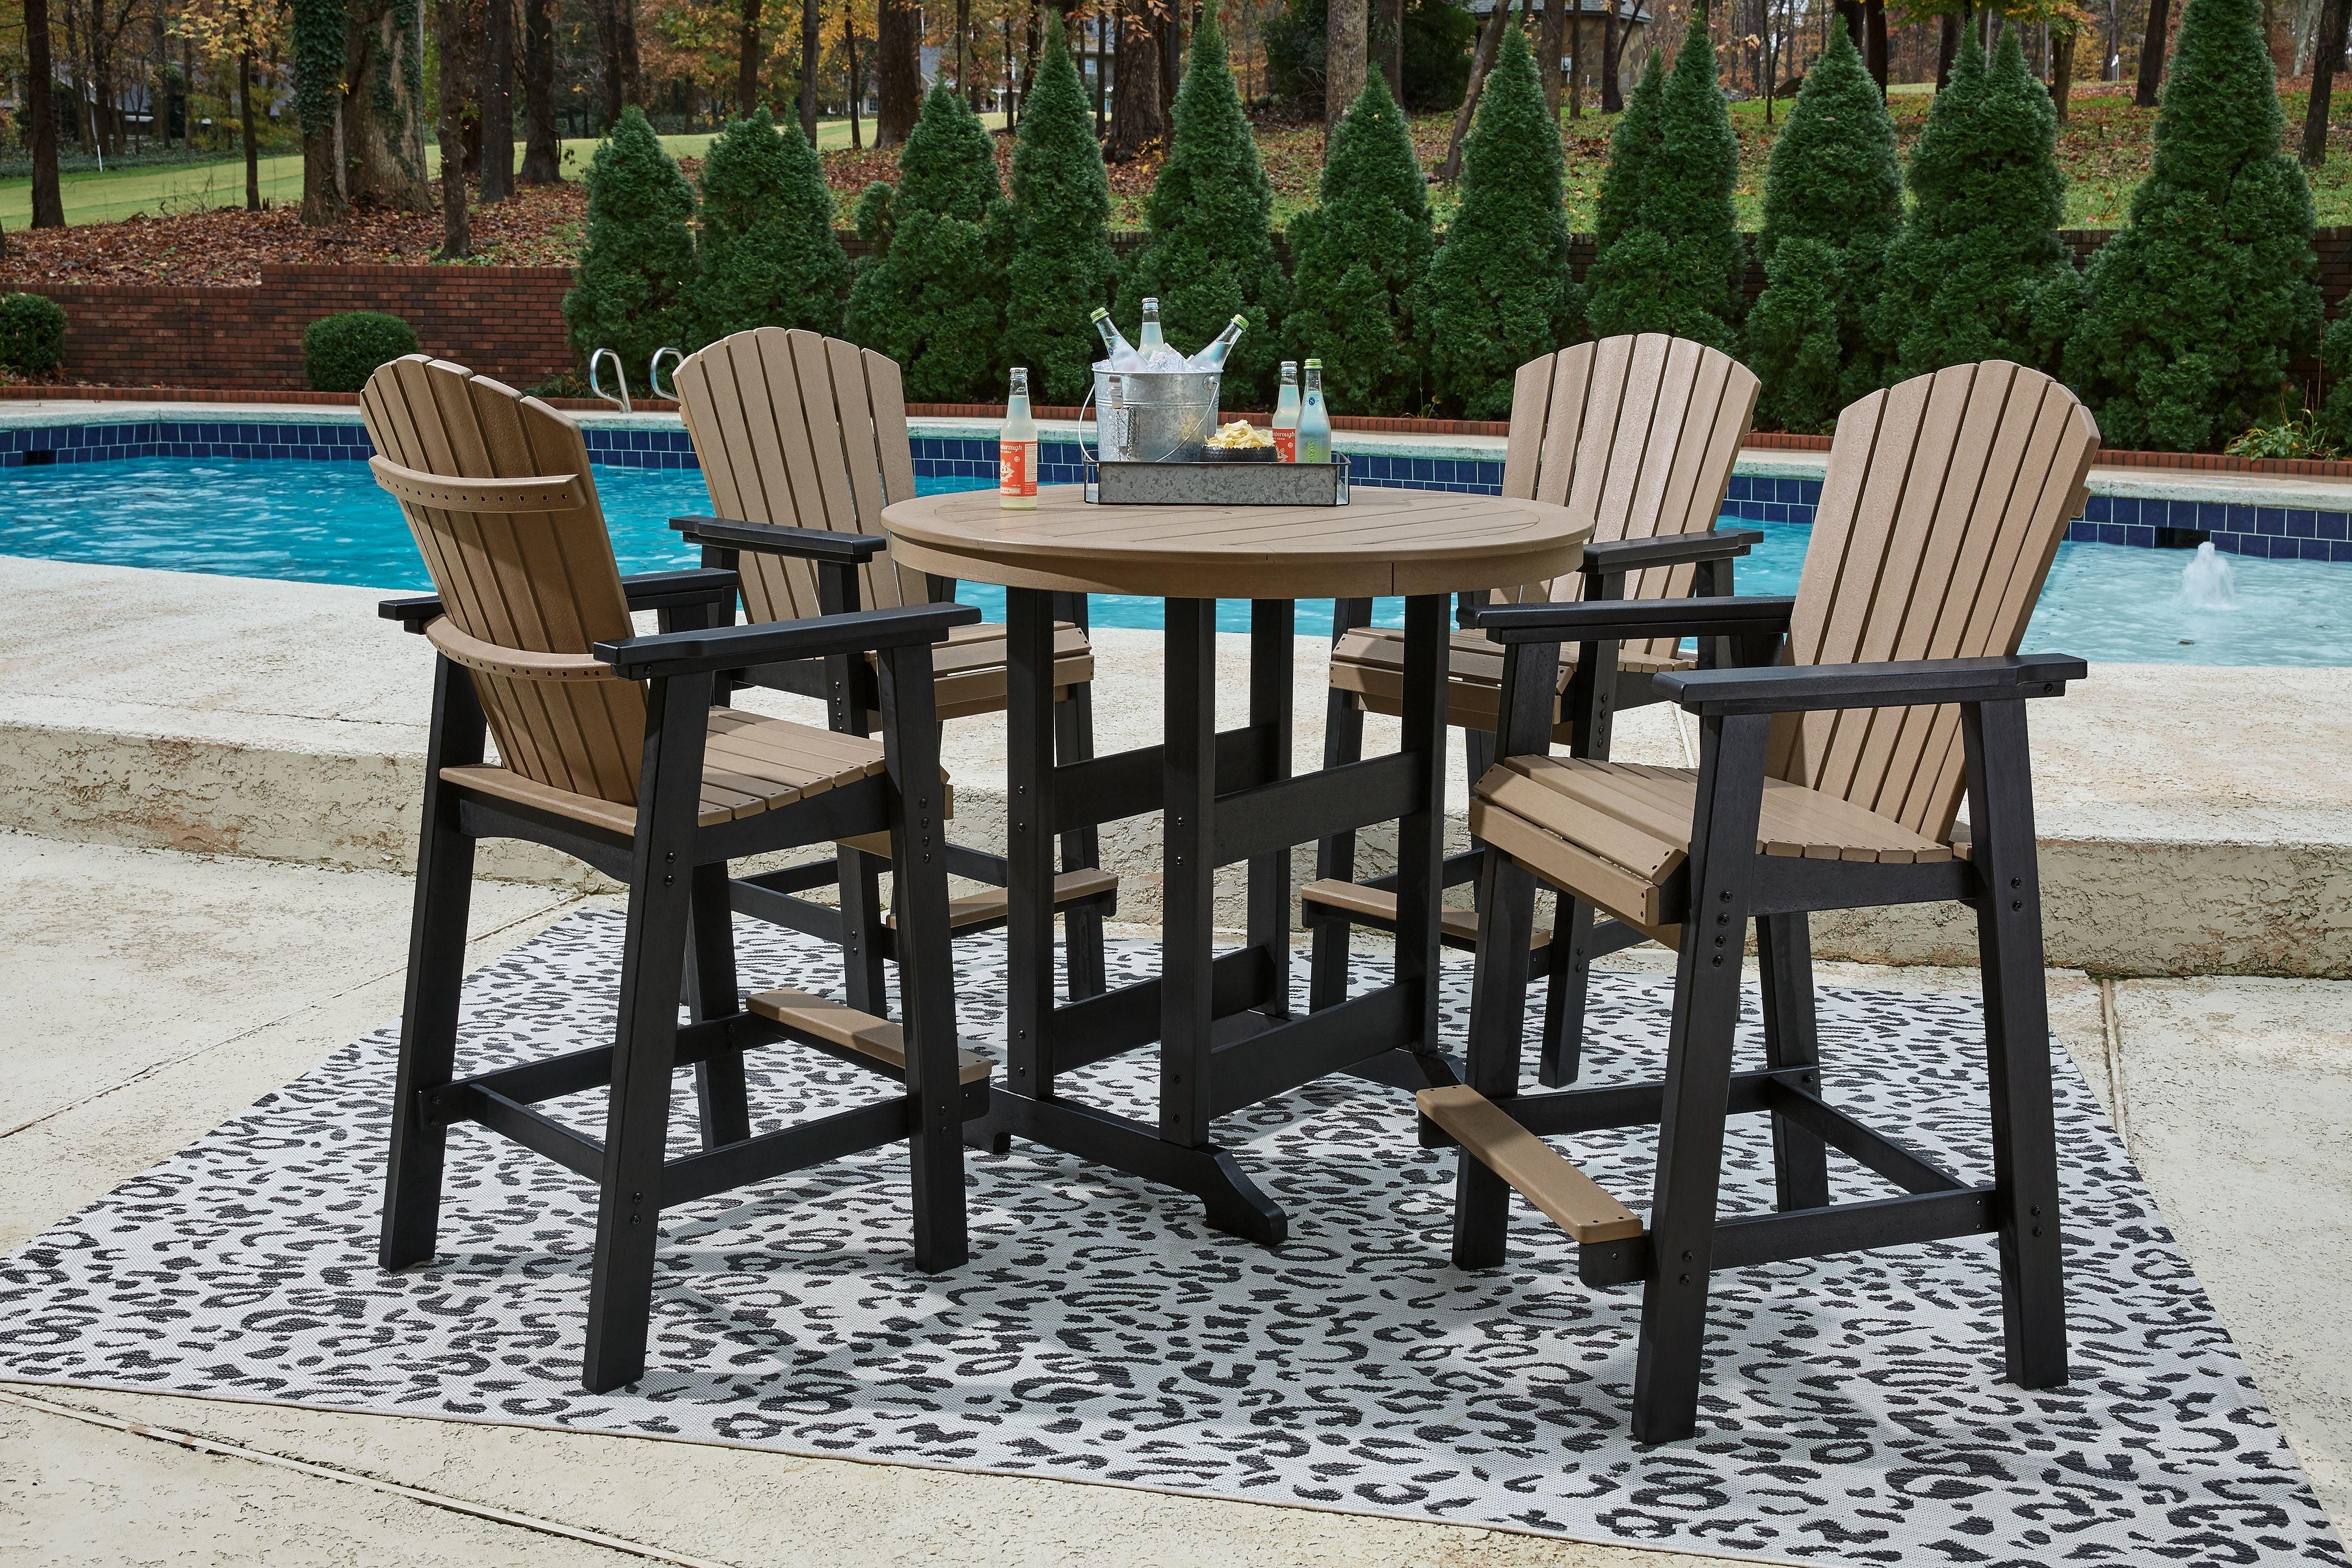 Signature Design by Ashley® - Fairen Trail - Black / Driftwood - 5 Pc. - Dining Set With 4 Chairs - 5th Avenue Furniture